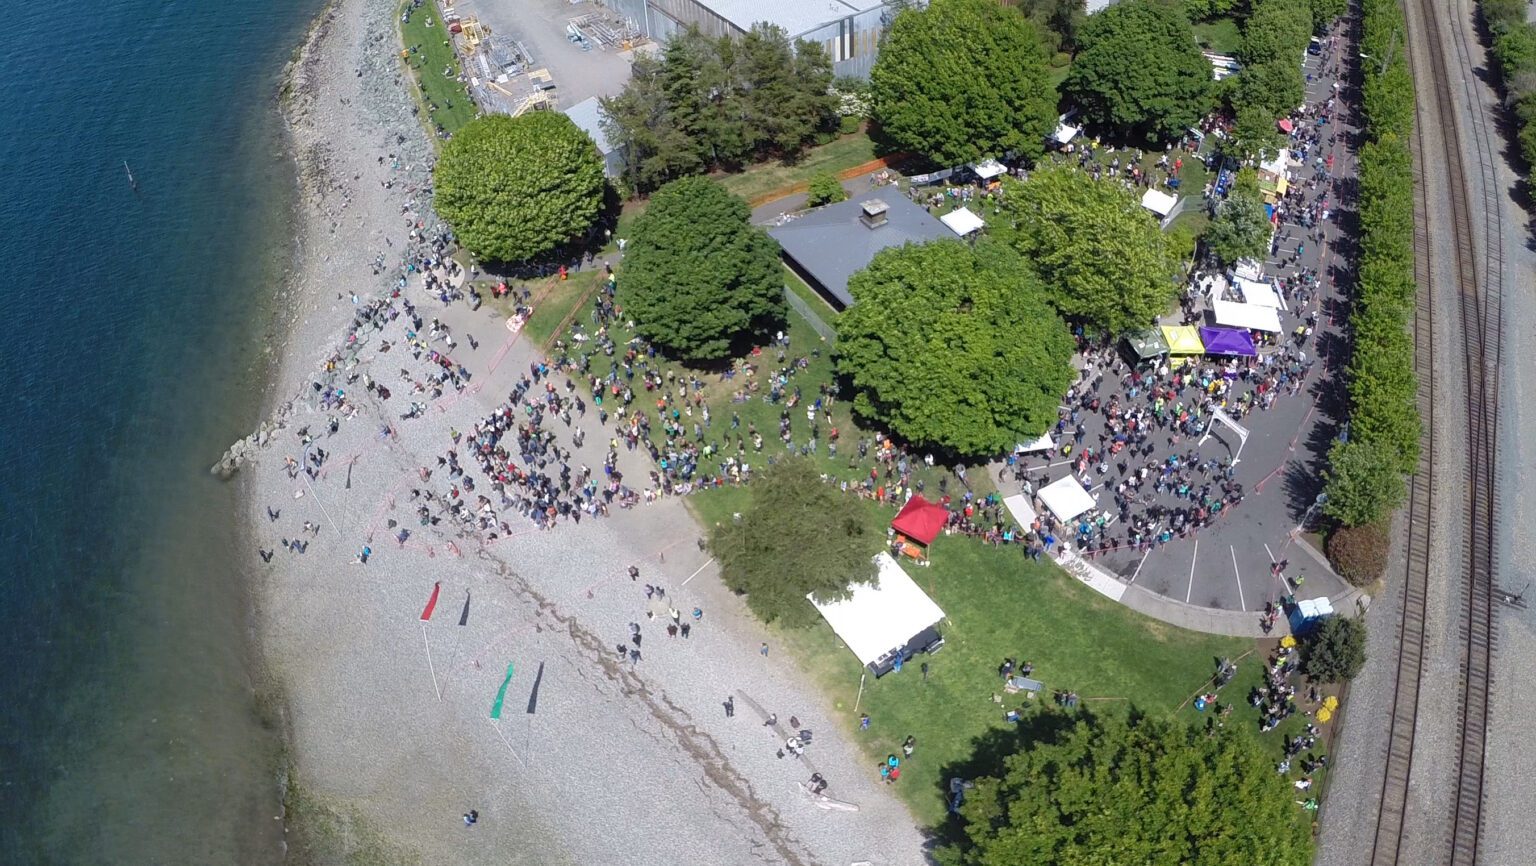 An aerial look at the finish line of the Ski to Sea race at Marine Park in Fairhaven.